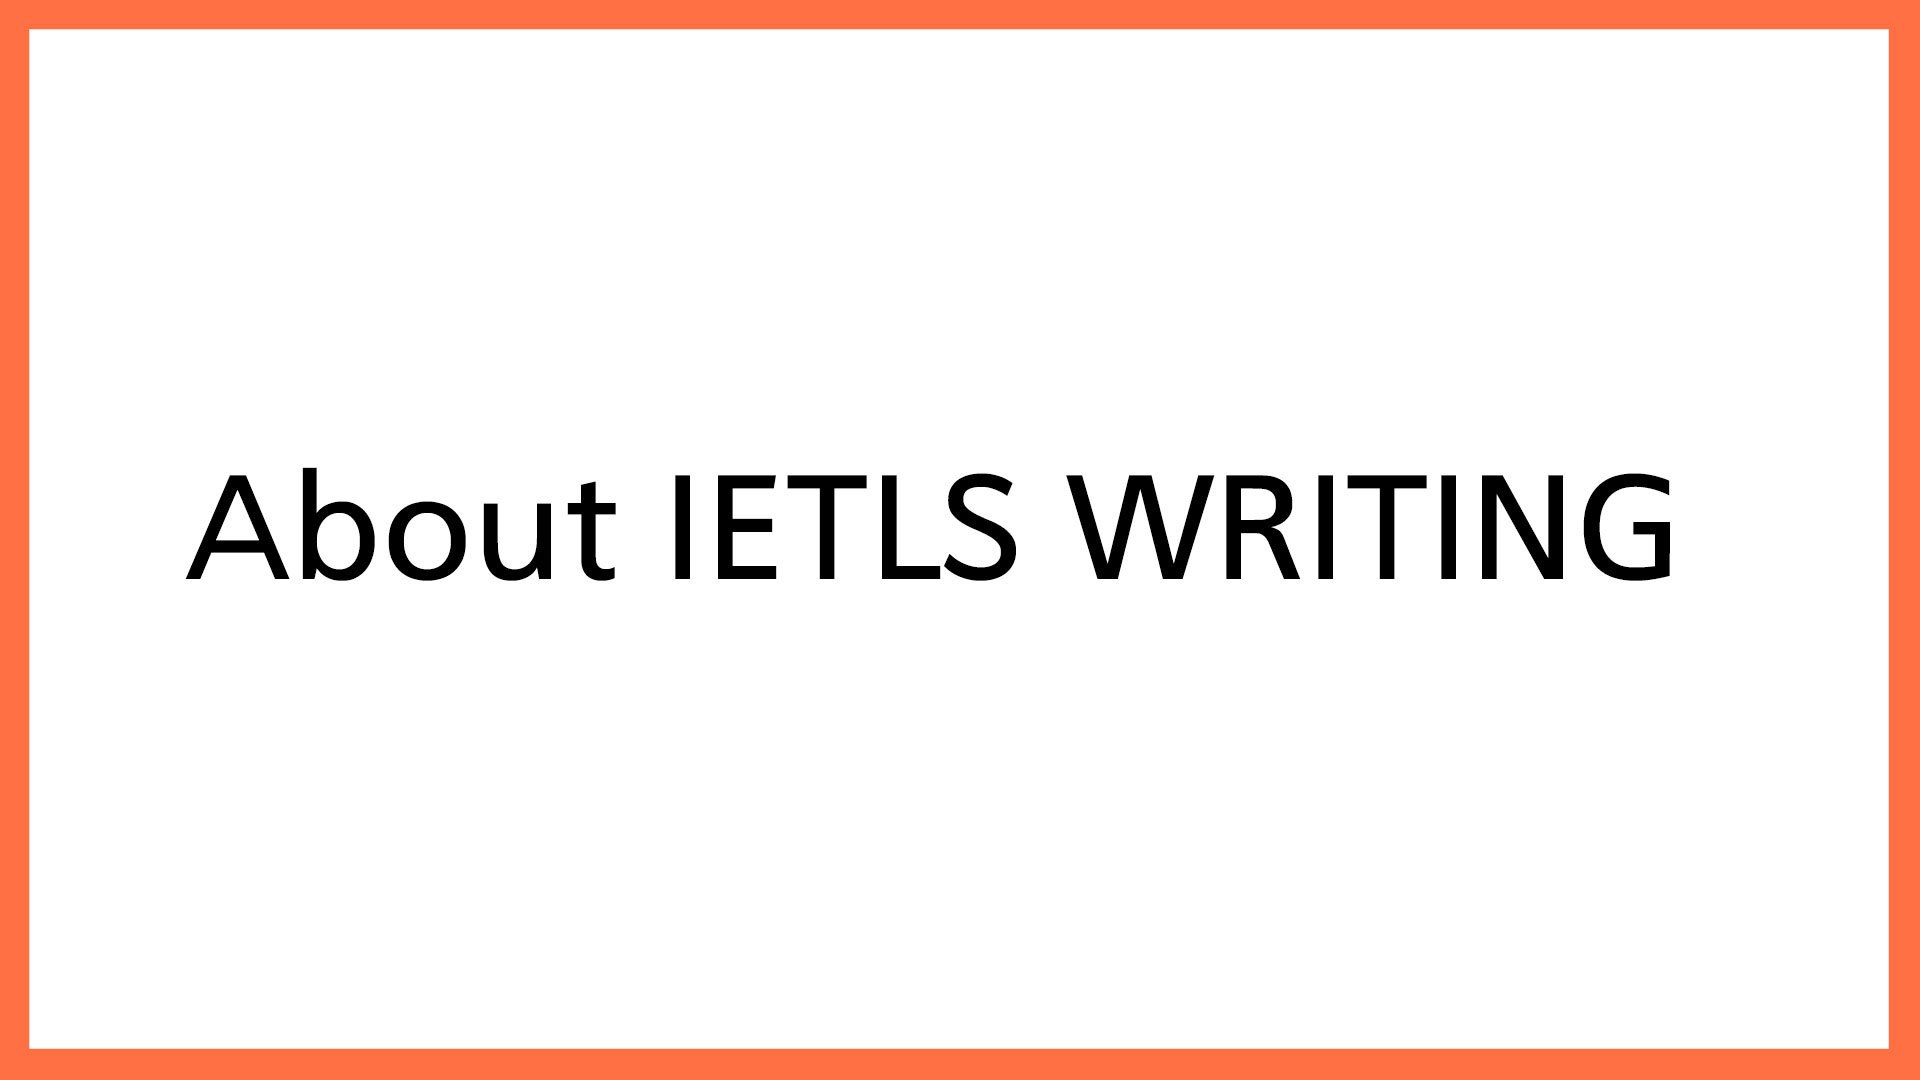 About IELTS Writing